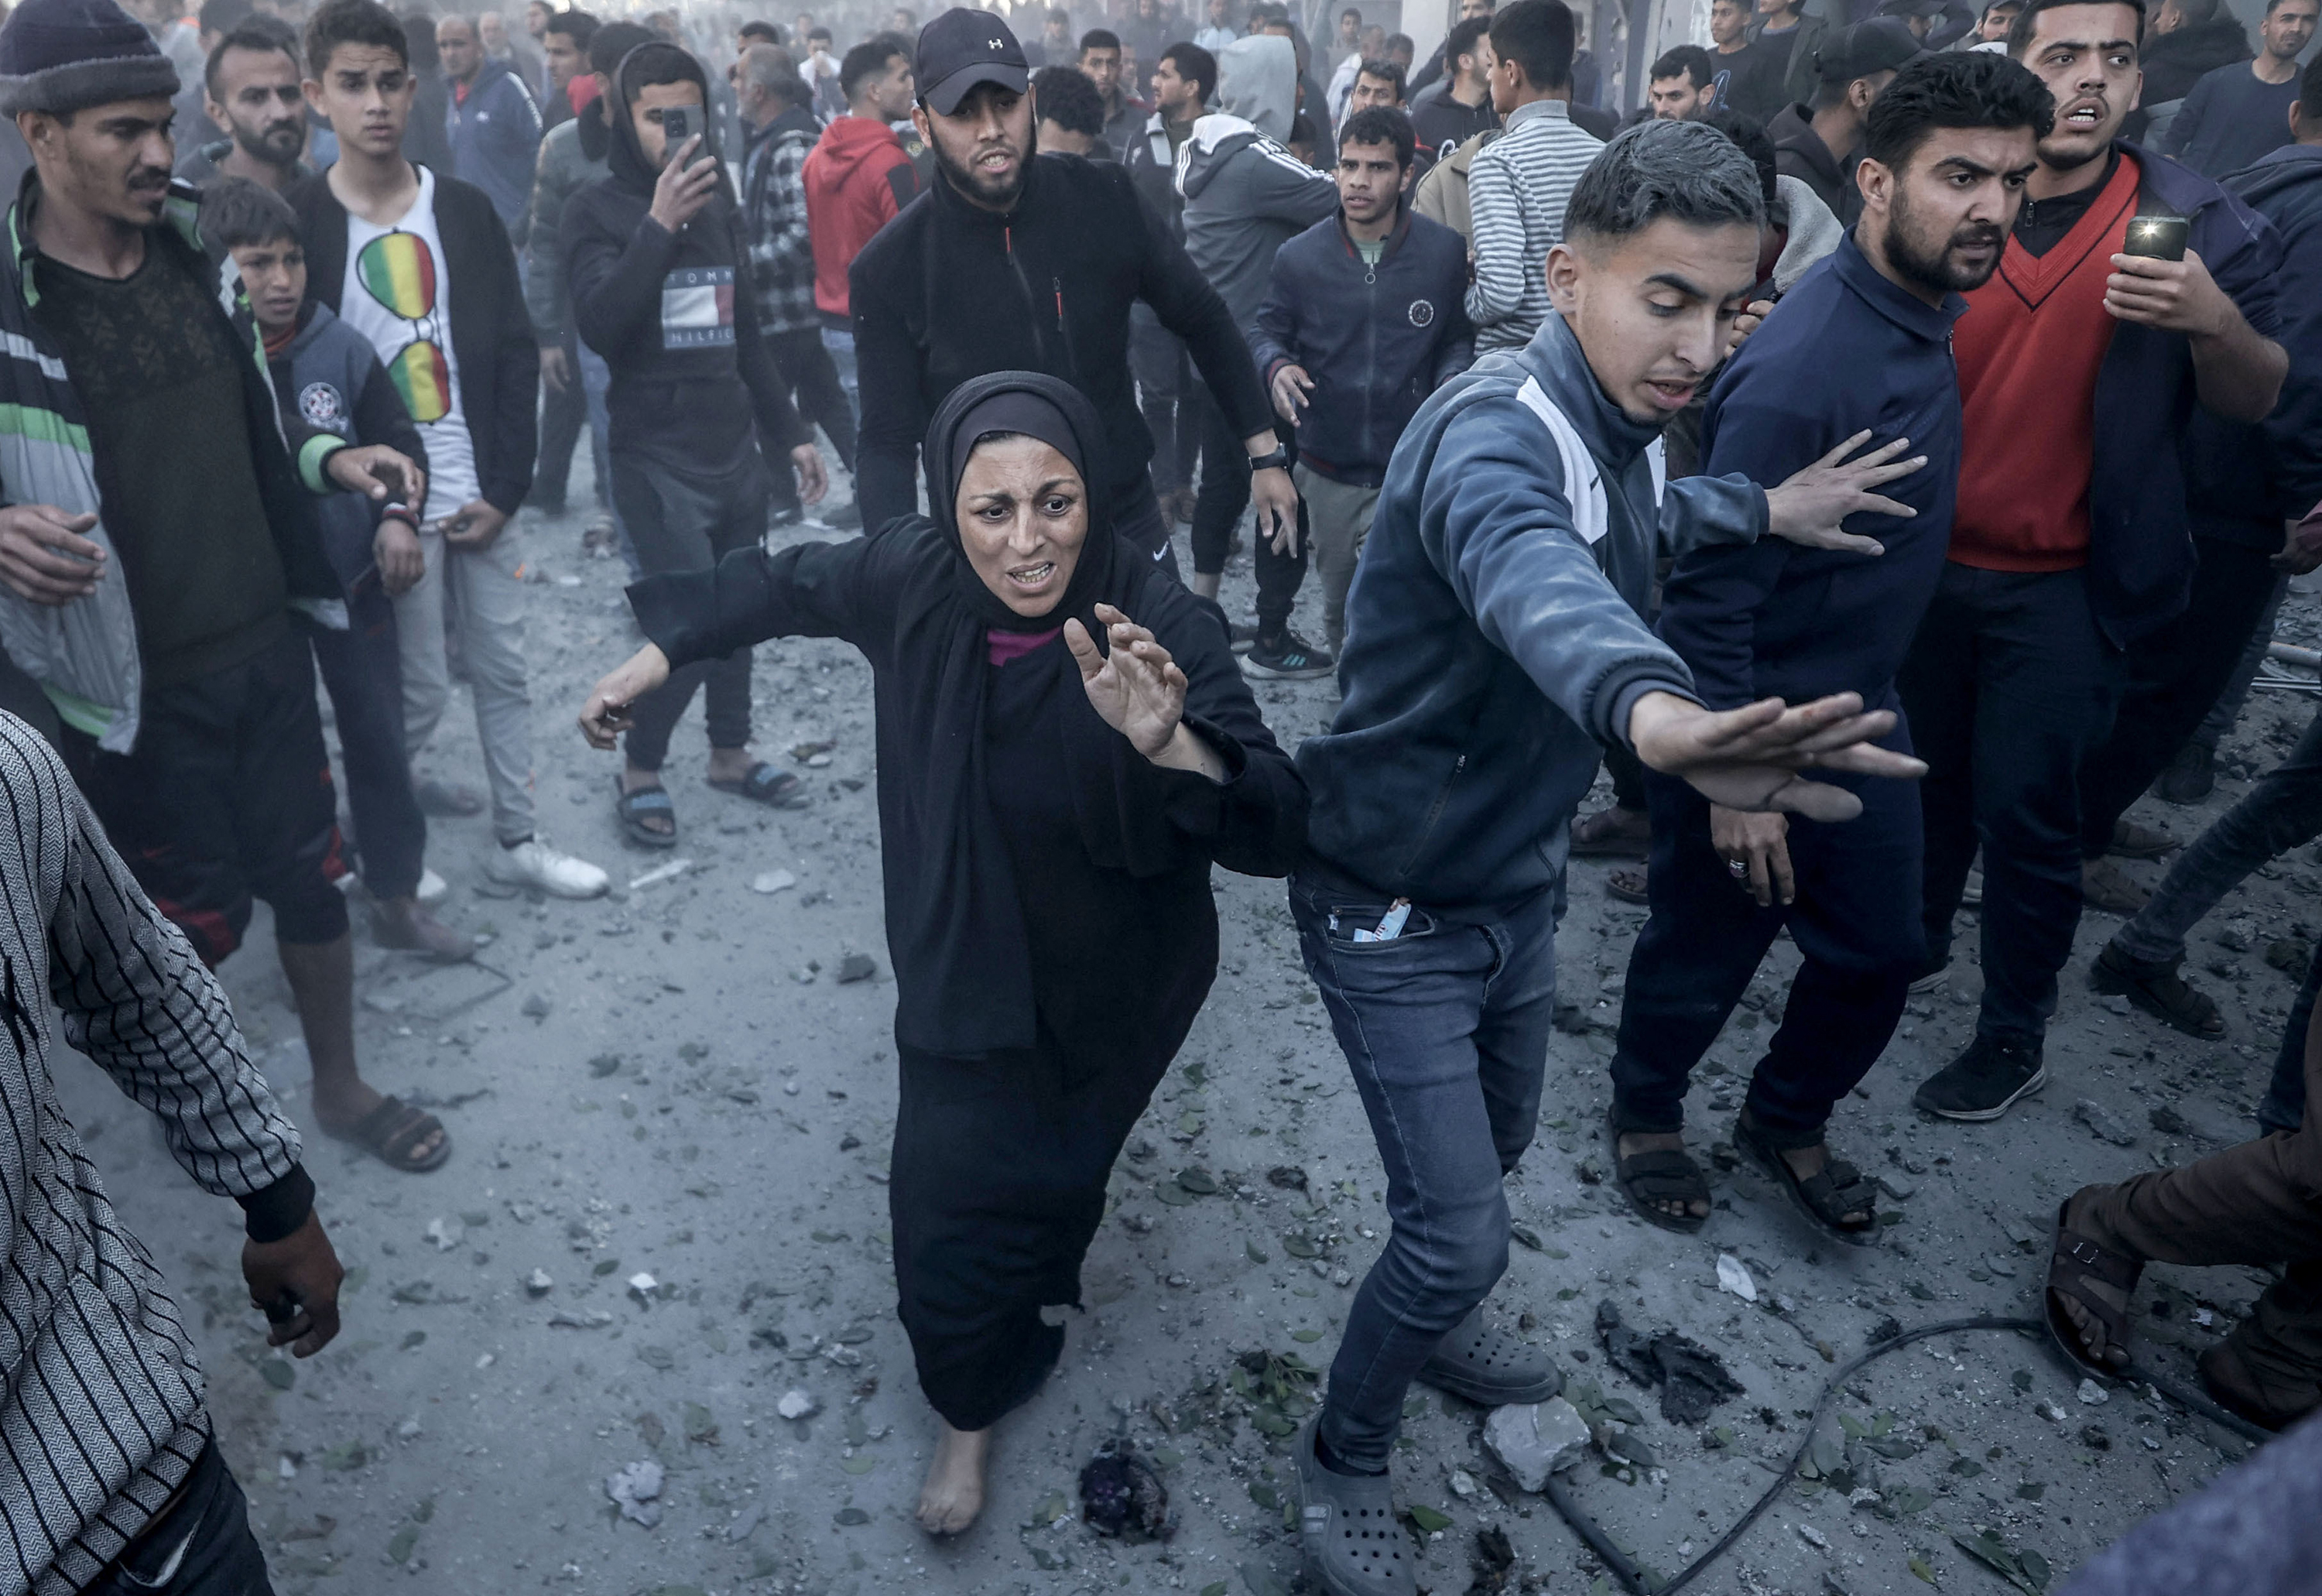  A woman runs to the scene to see her relative after an Israeli attack in Deir al-Balah, Gaza on February 17.